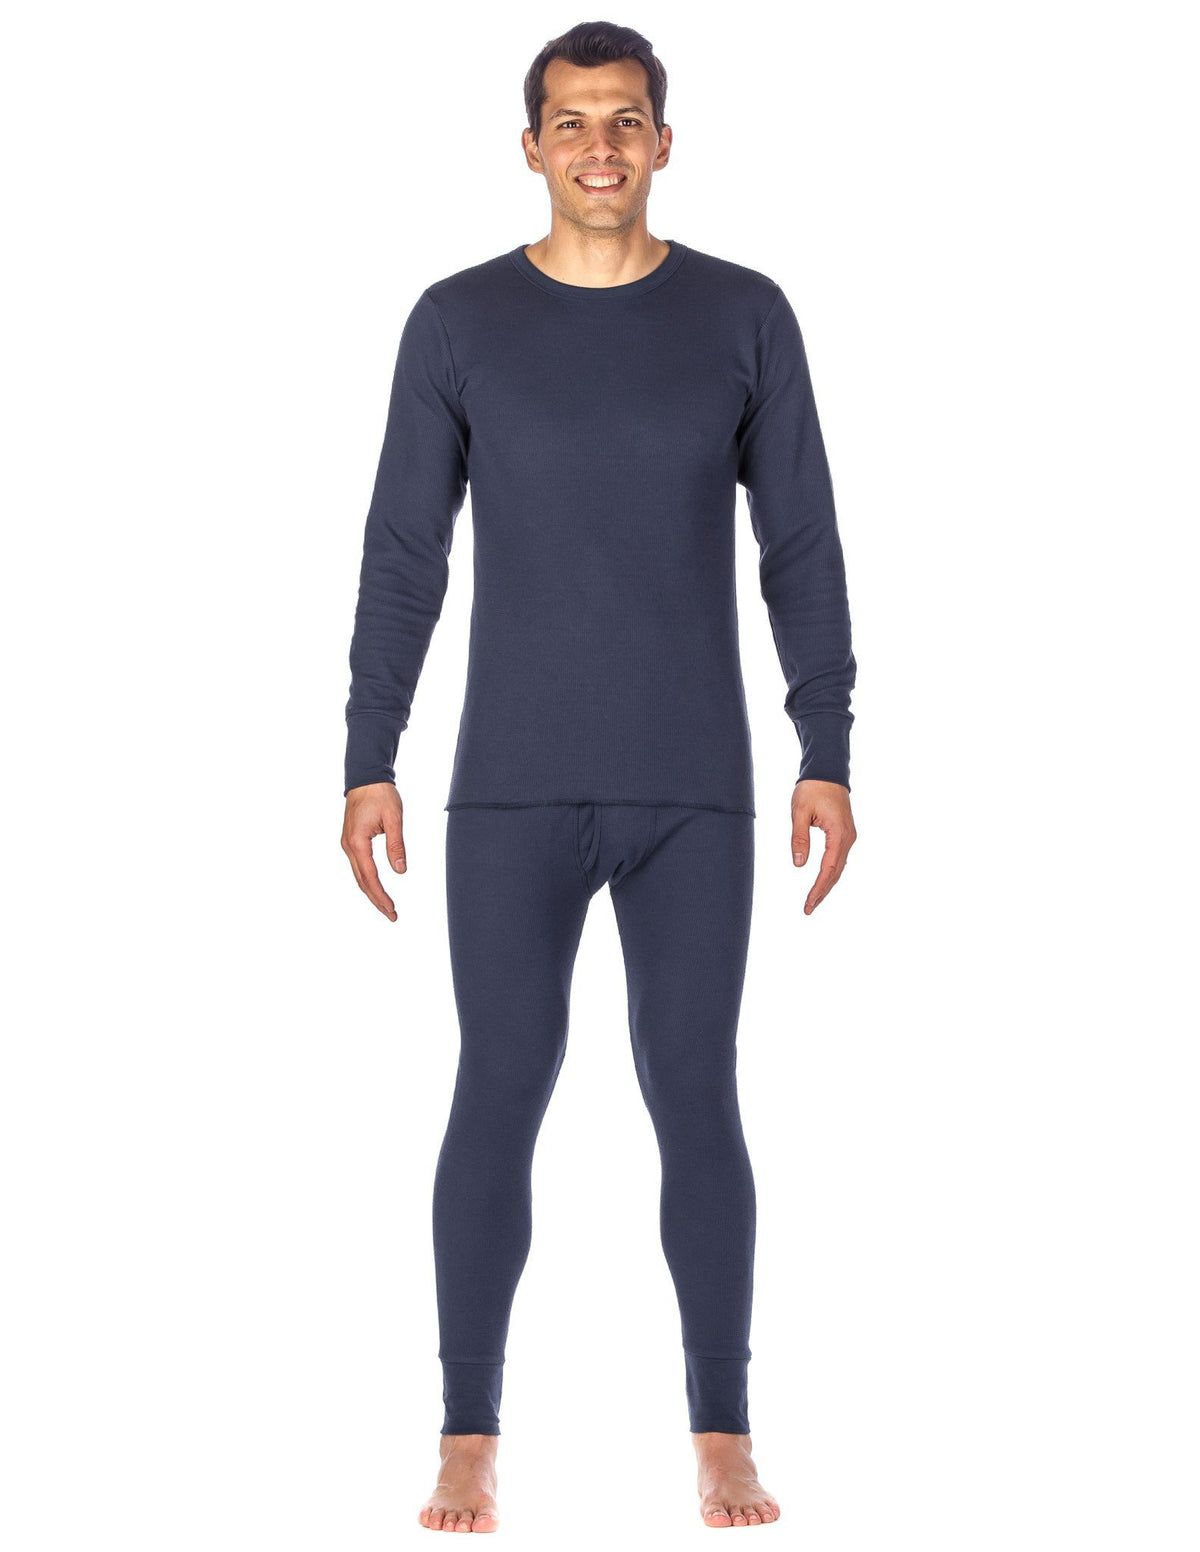 Men's Classic Waffle Knit Thermal Top and Bottom Set - Dark Blue